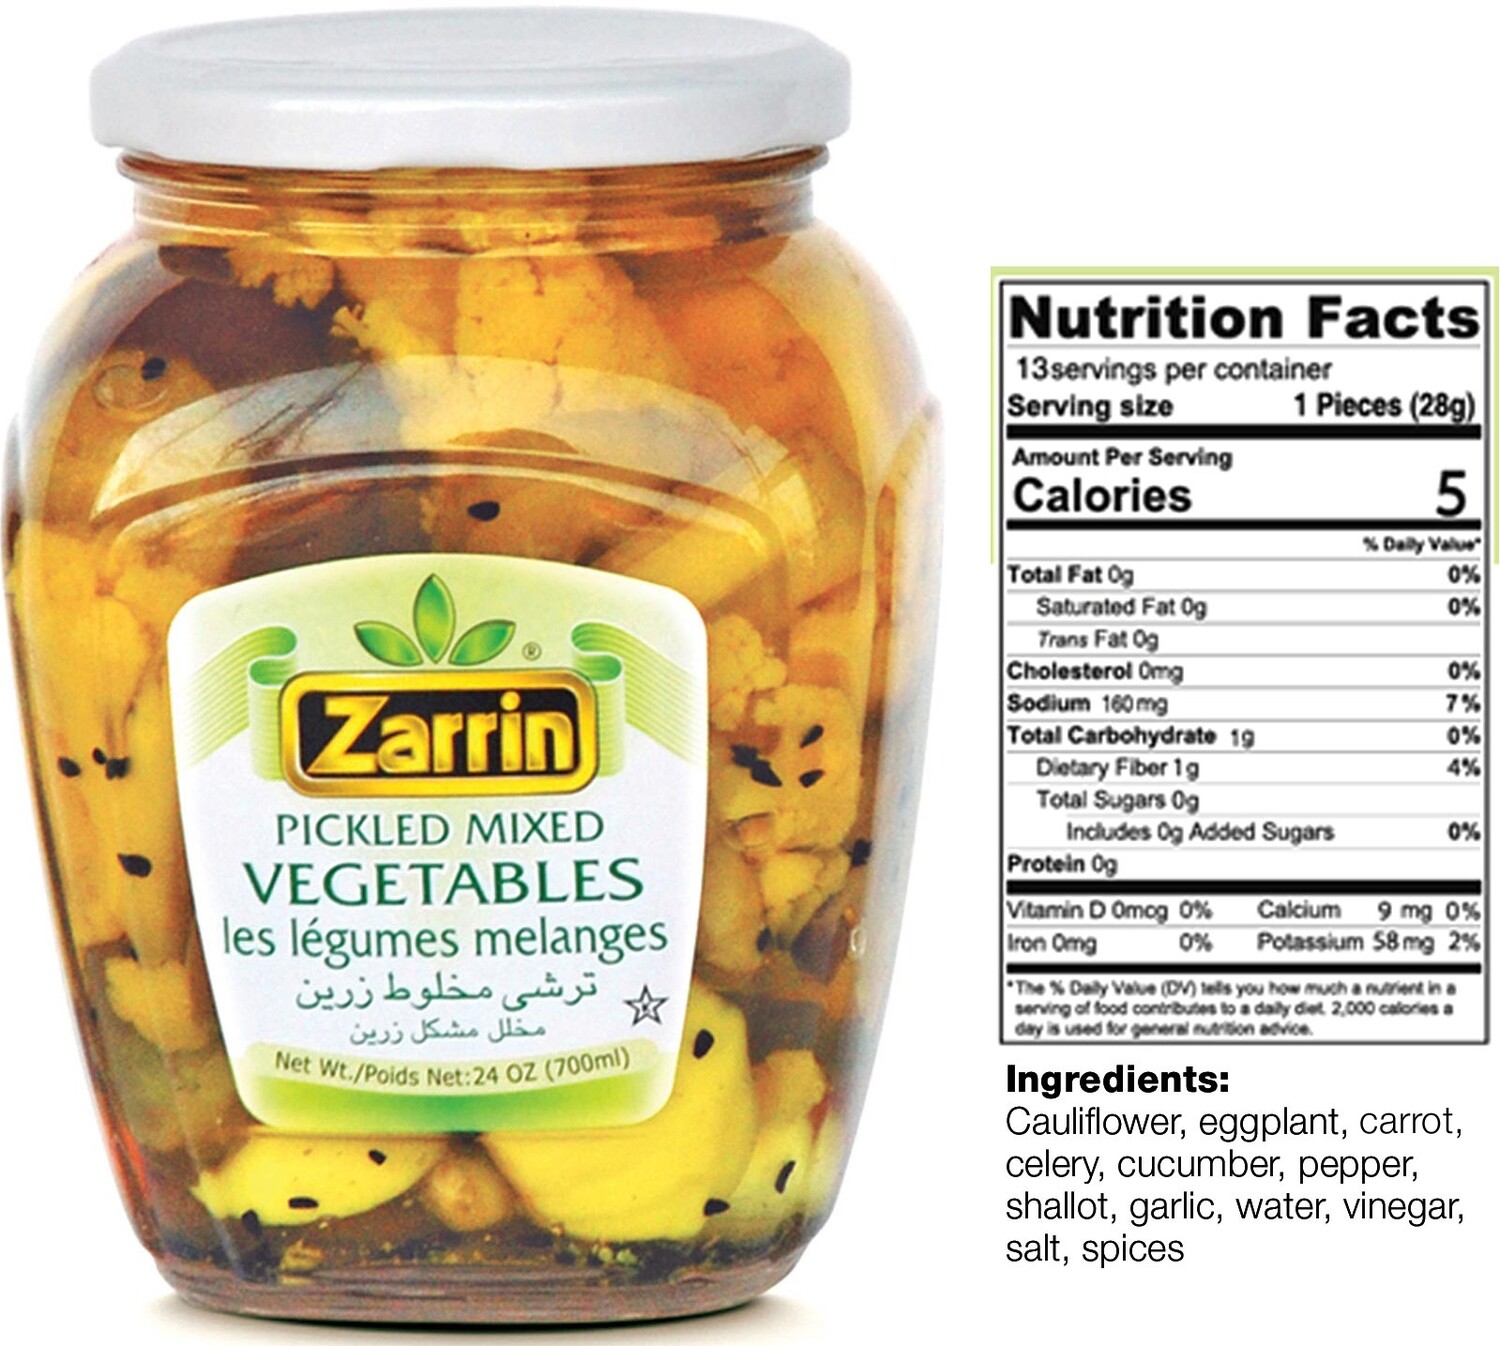 Zarrin Pickled Mixed Vegetables In Glass JarNet weight: 24 oz (700g